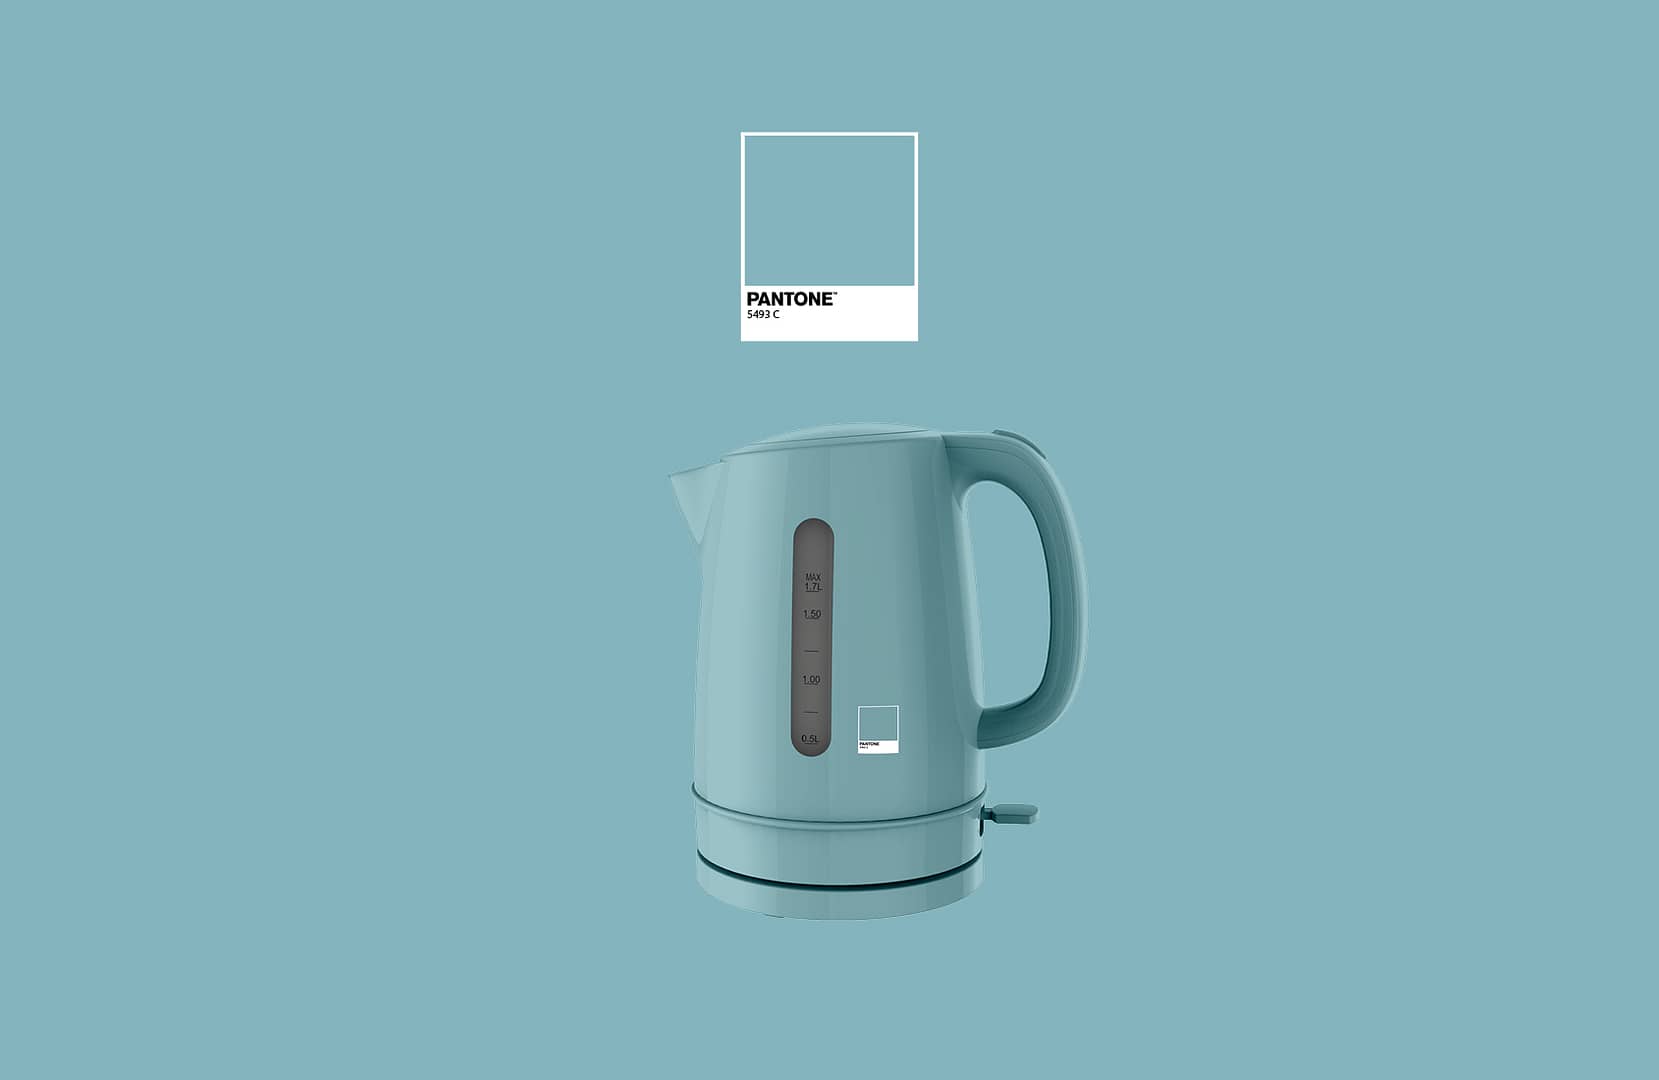 CMF design for the application of new color distributions - teal green - to small appliances designed by Bimar & Pantone